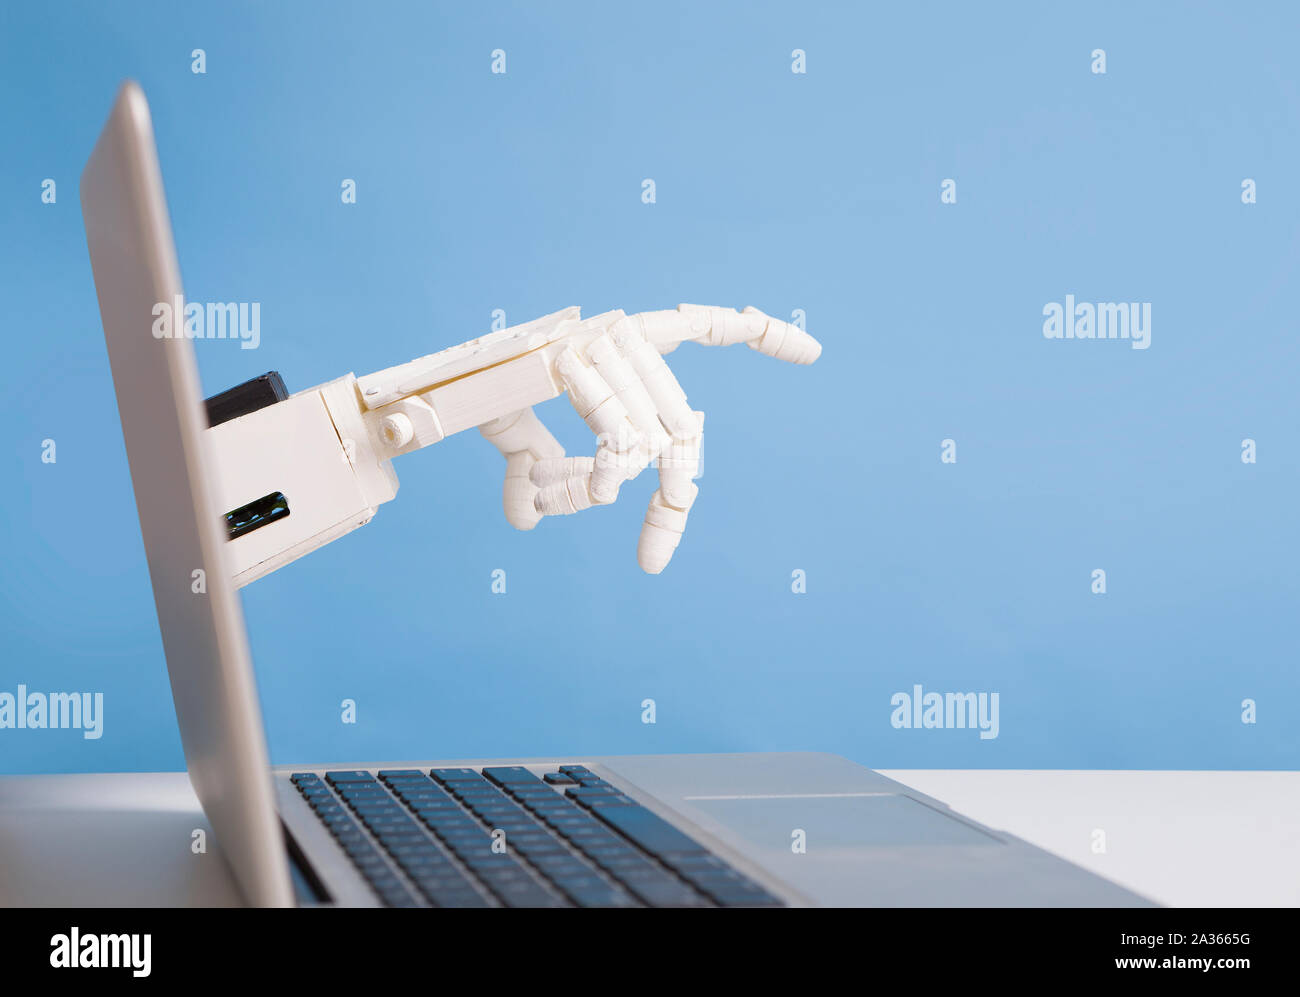 Man Playing Cyberchess Hand Reaching Into Computer To Make Move High-Res  Stock Photo - Getty Images